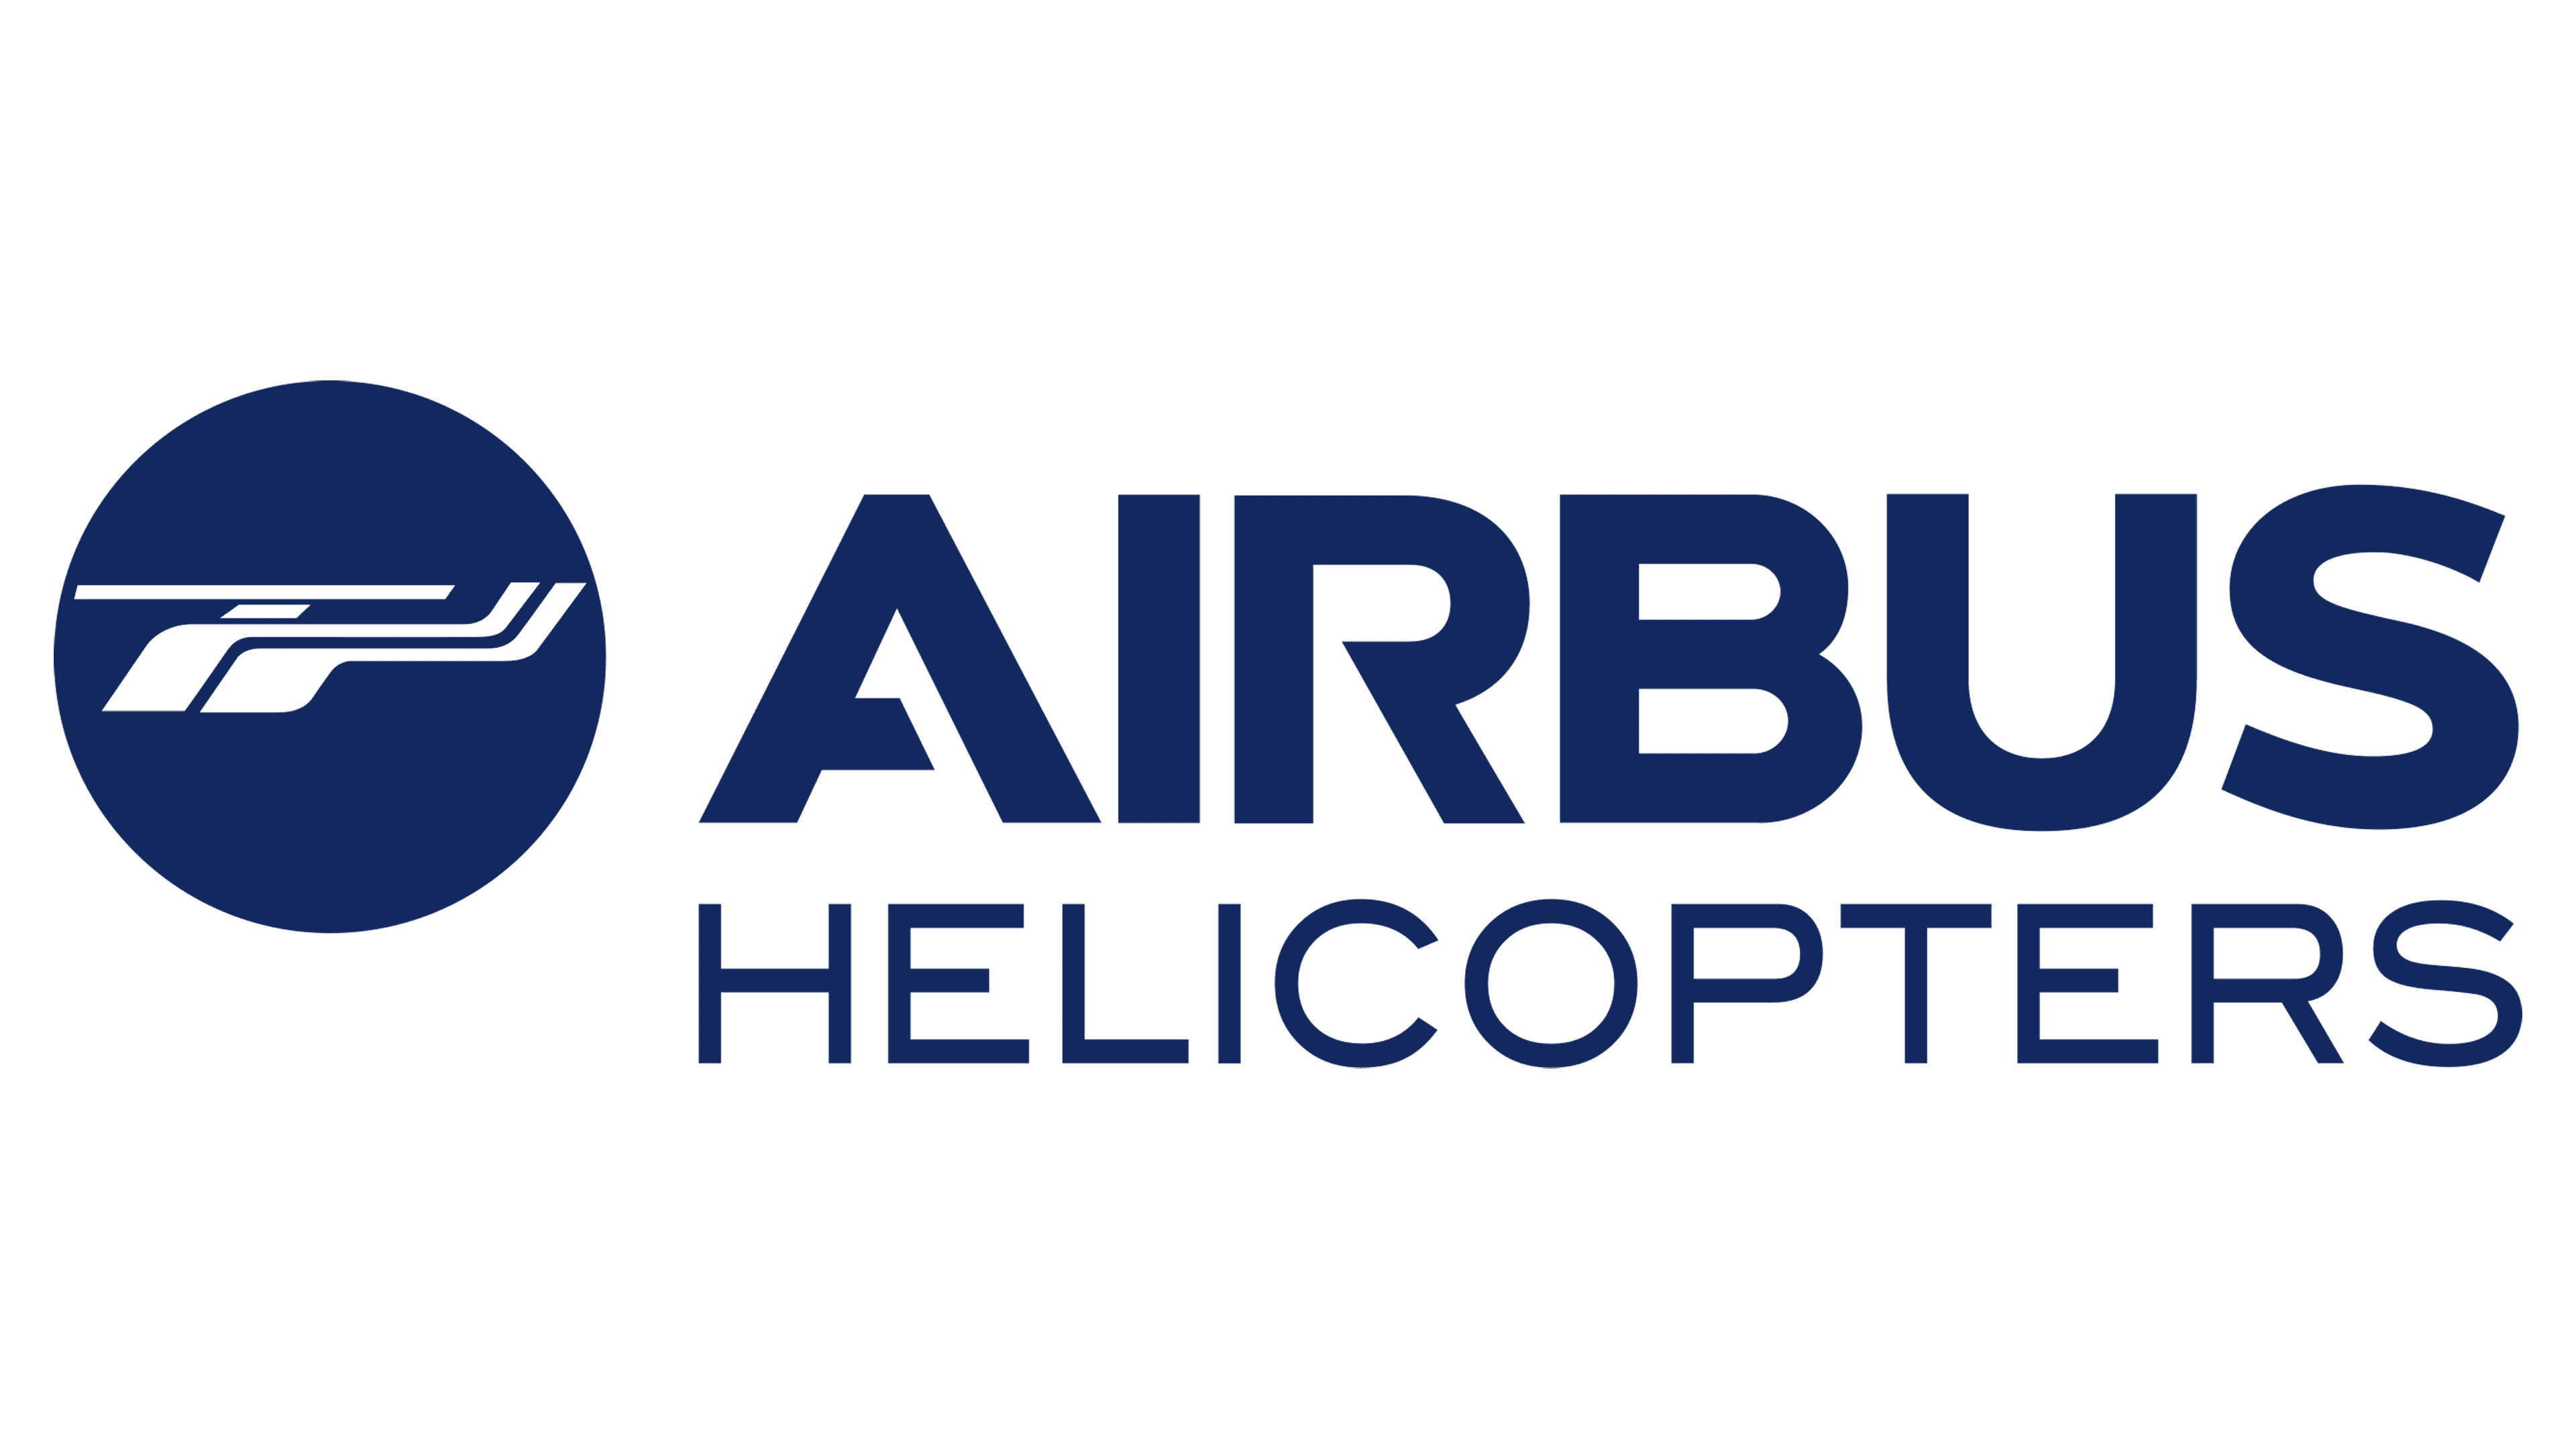 airbus helicopters logo